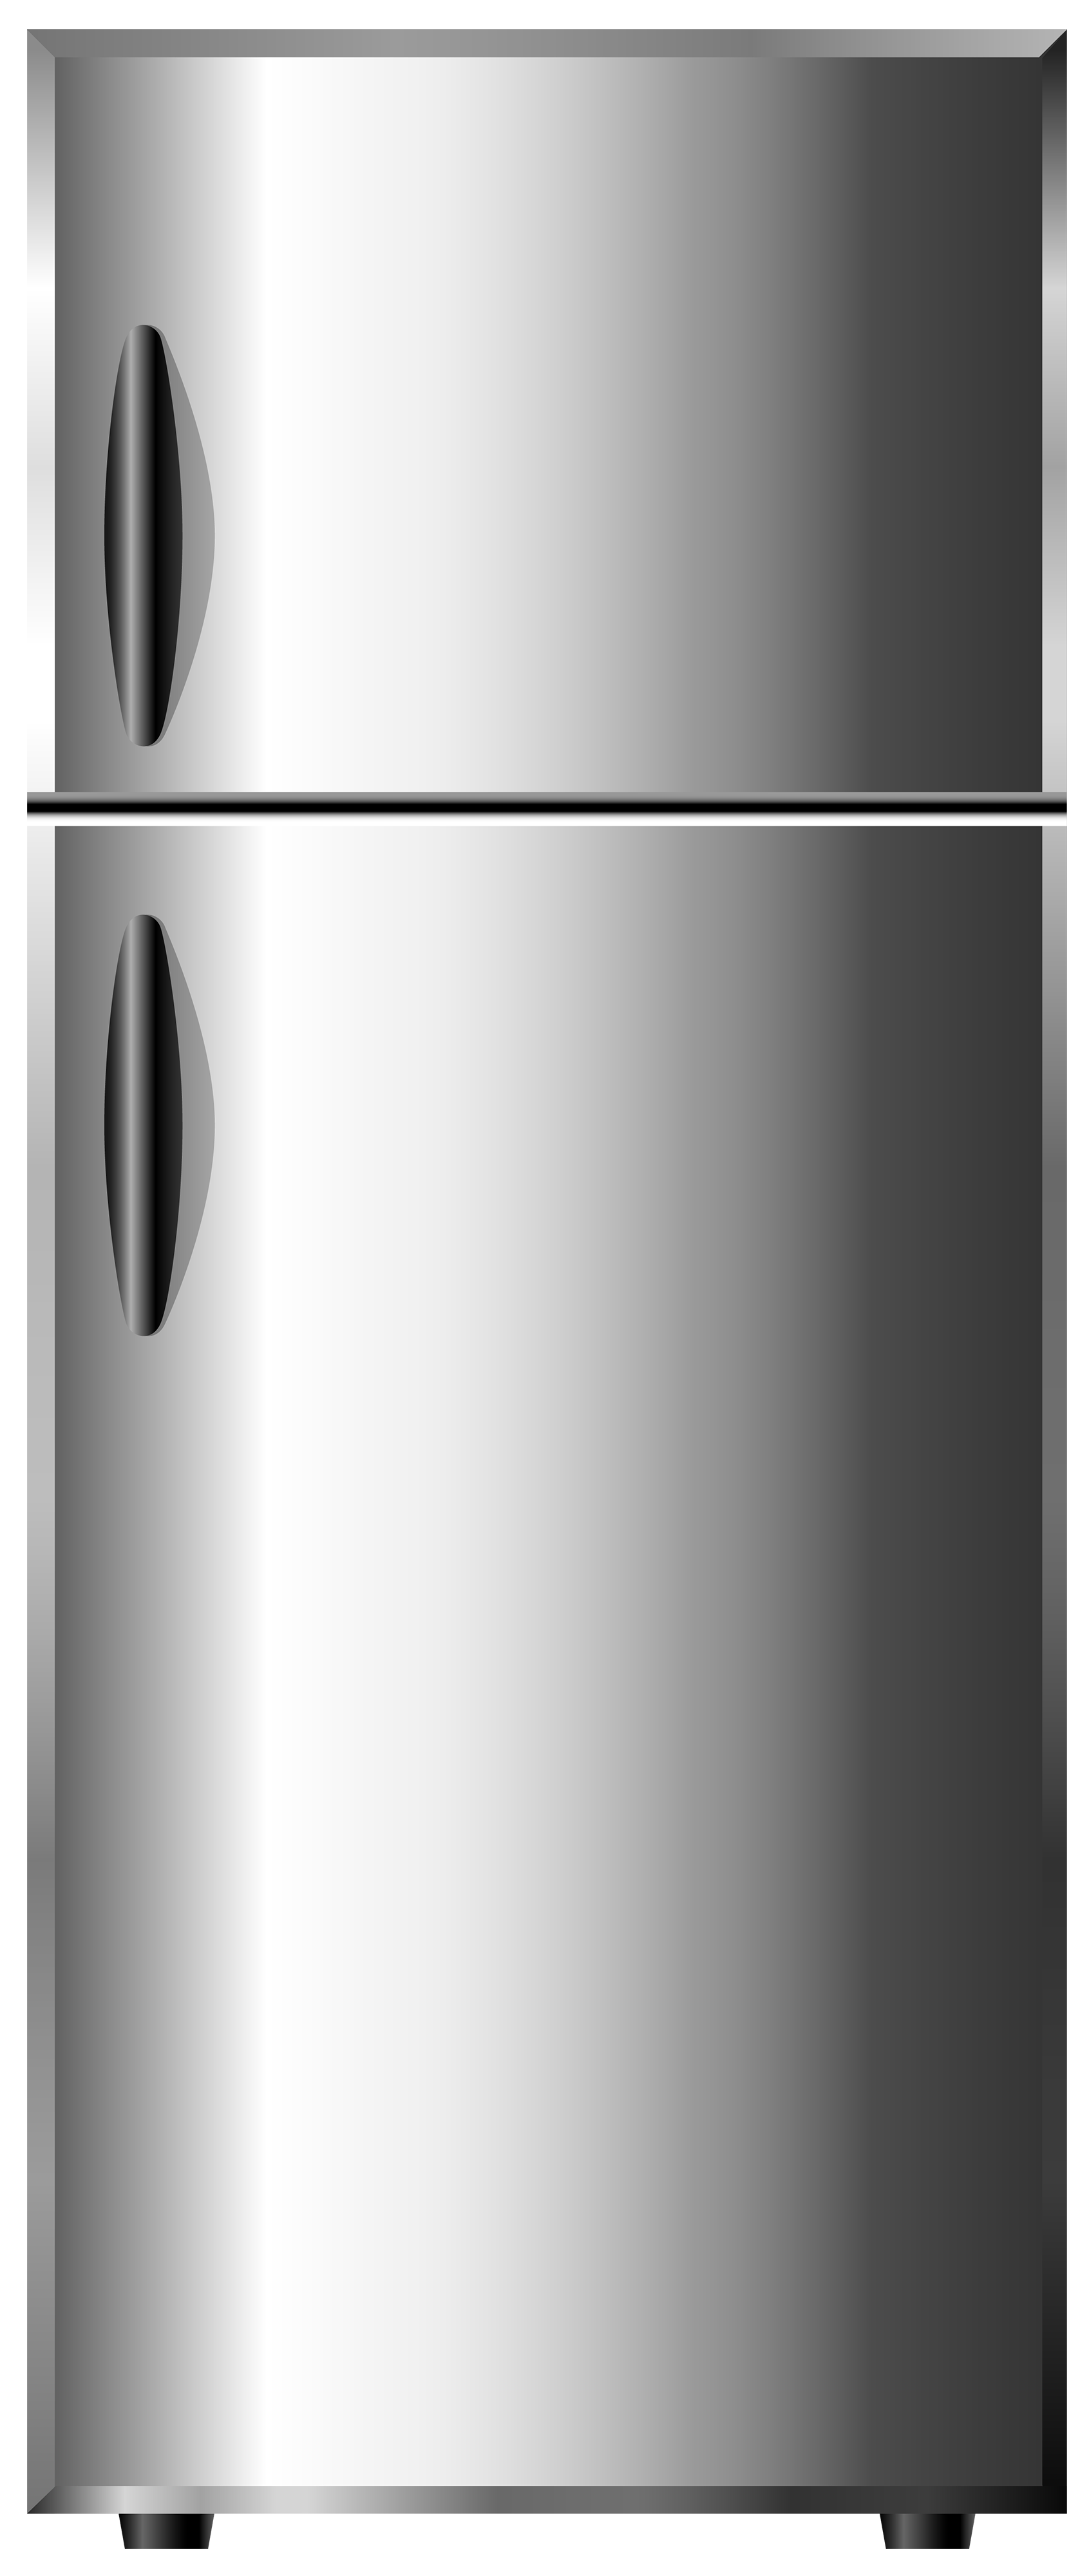 free clipart images refrigerator - photo #49